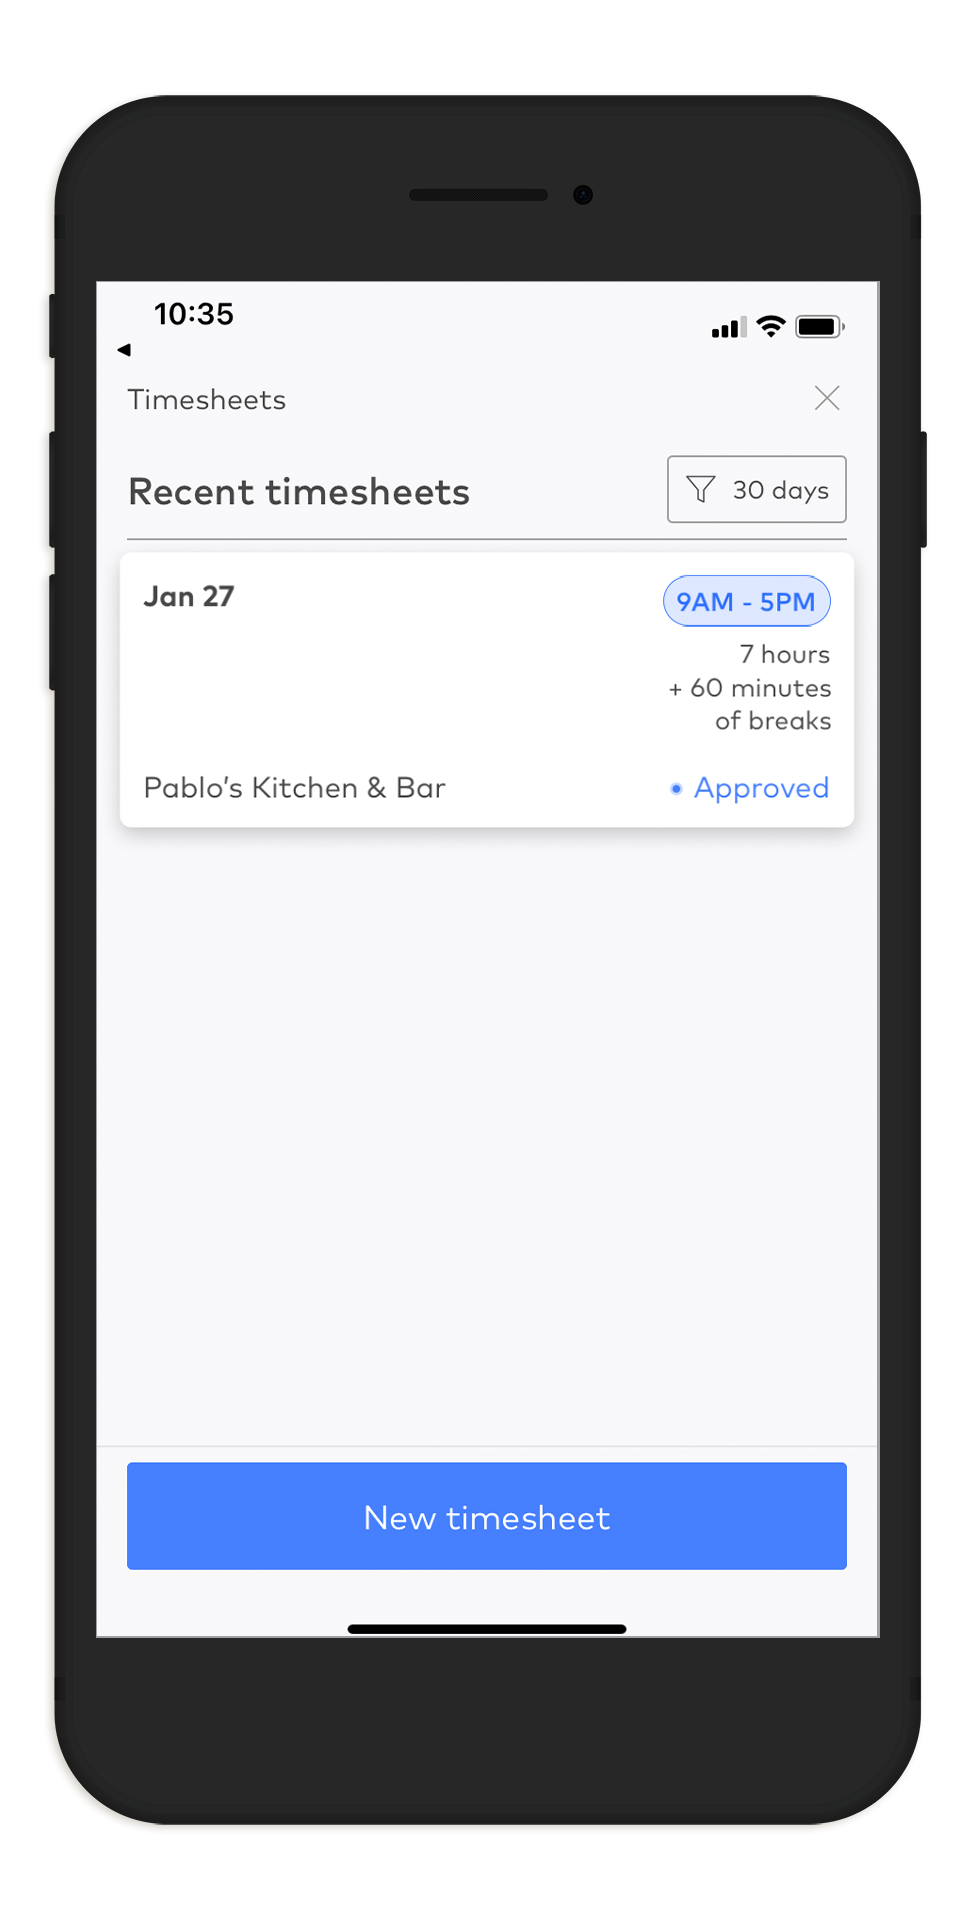 timesheets_mobile_app_recent_timesheets.png